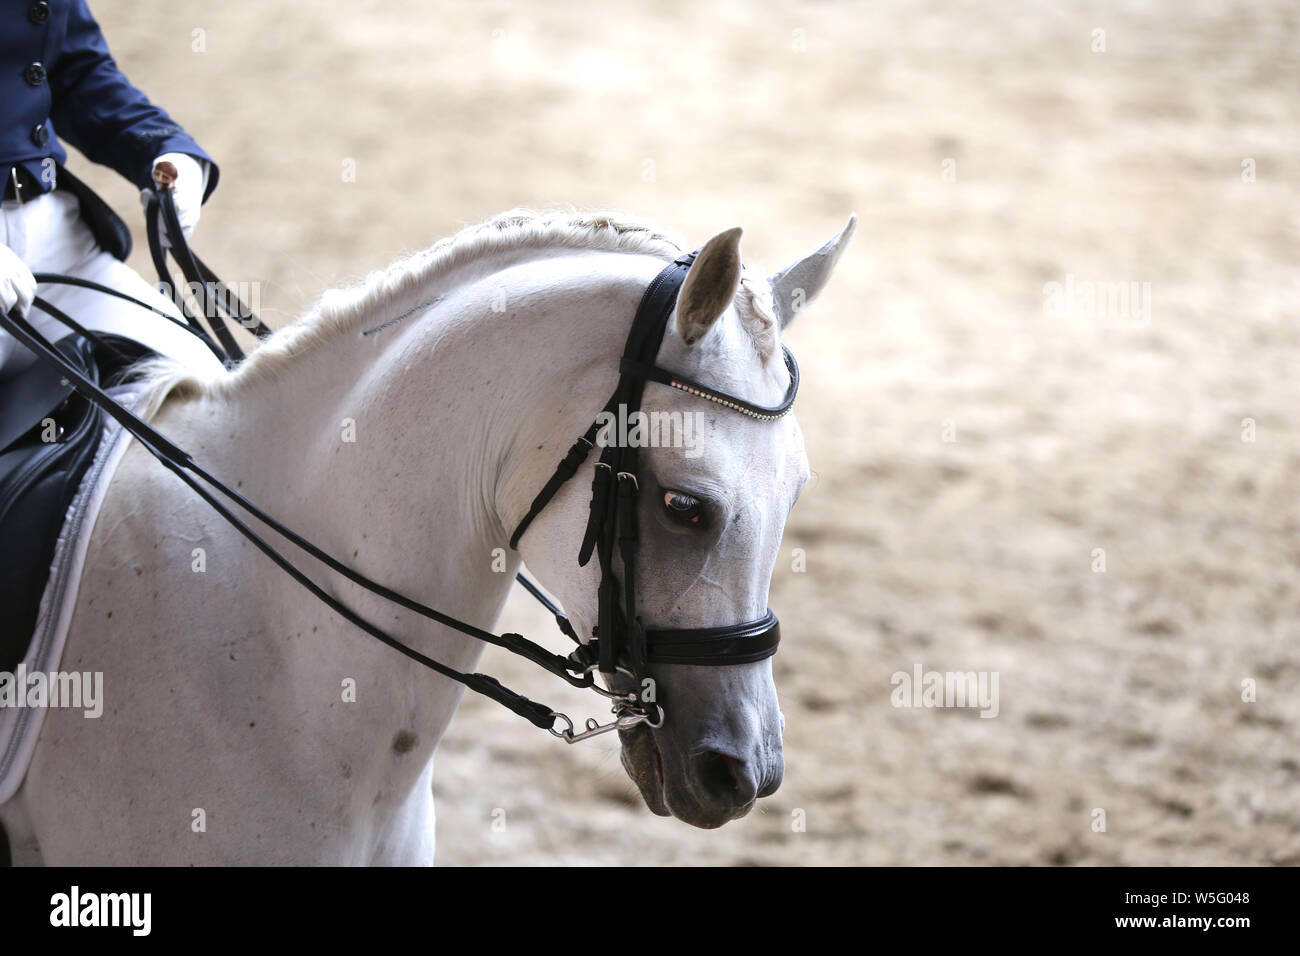 Portrait head shot close up of a beautiful purebred dressage horse during event indoors Stock Photo